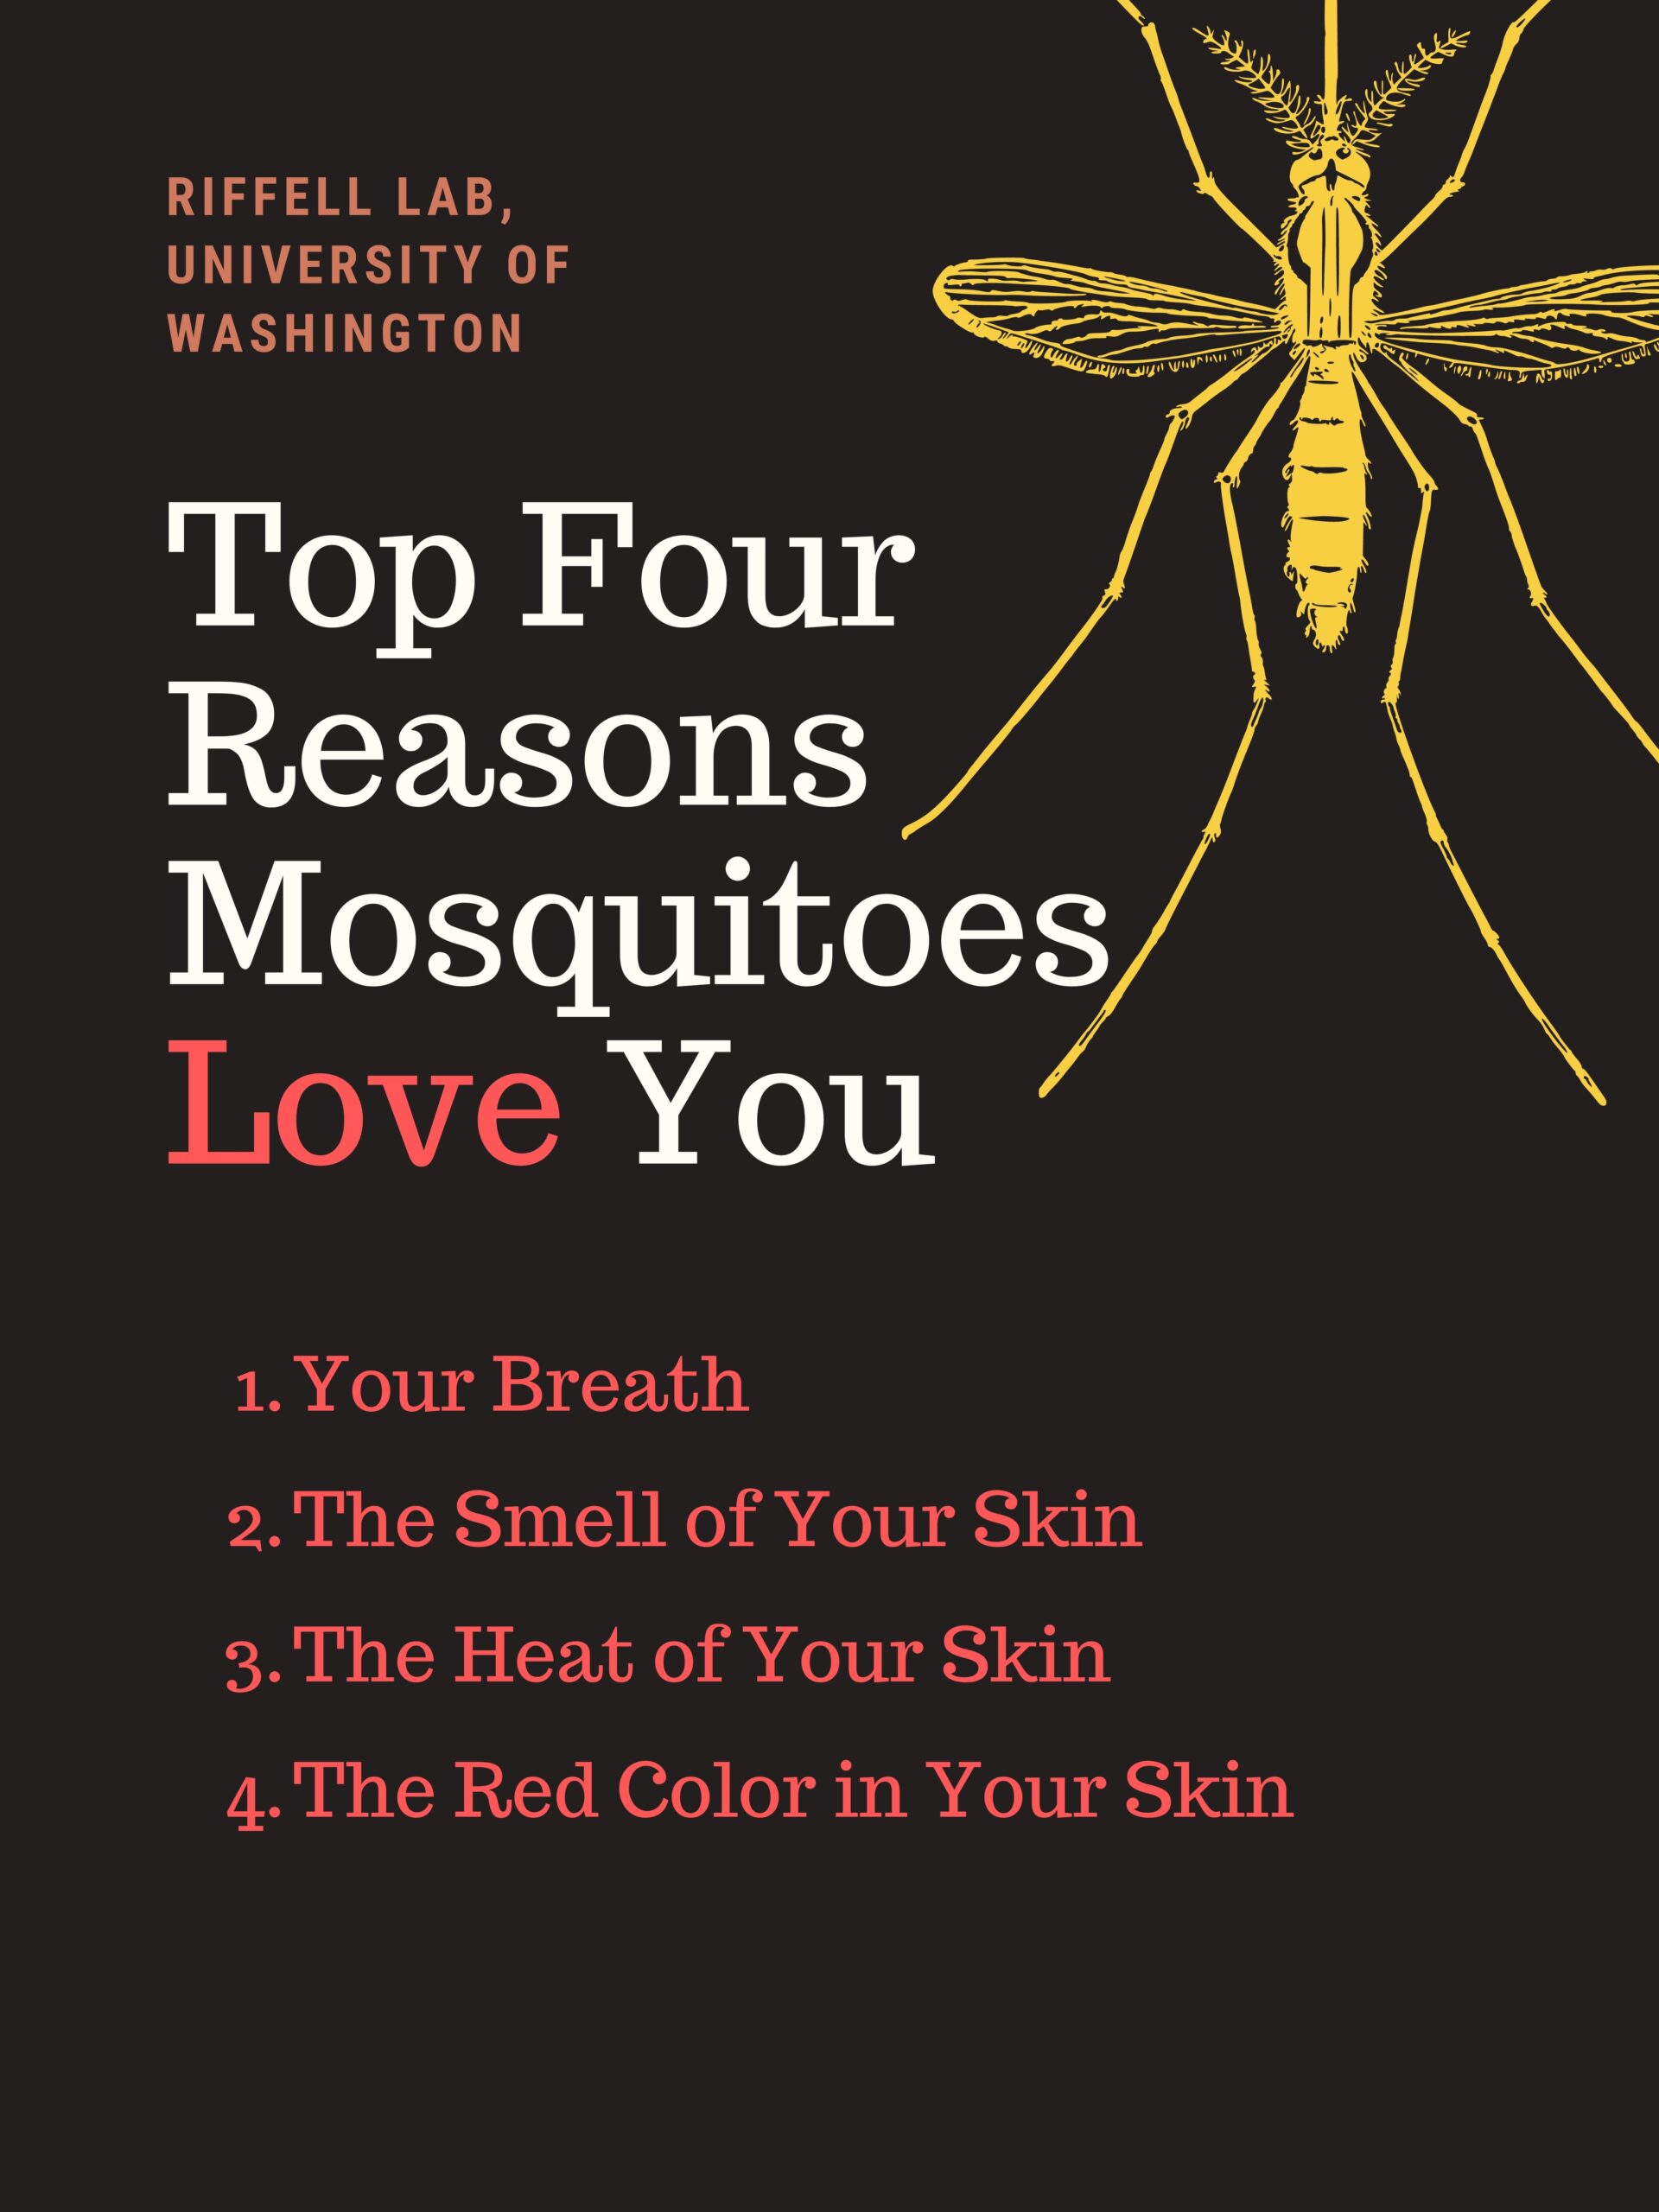 a poster with the following text: Riffel Lab, University of Washington, Top Four Reasons Mosquitoes Love You: 1. Your breath 2. The smell of your skin 3. The heat of your skin 4. The red color in your skin